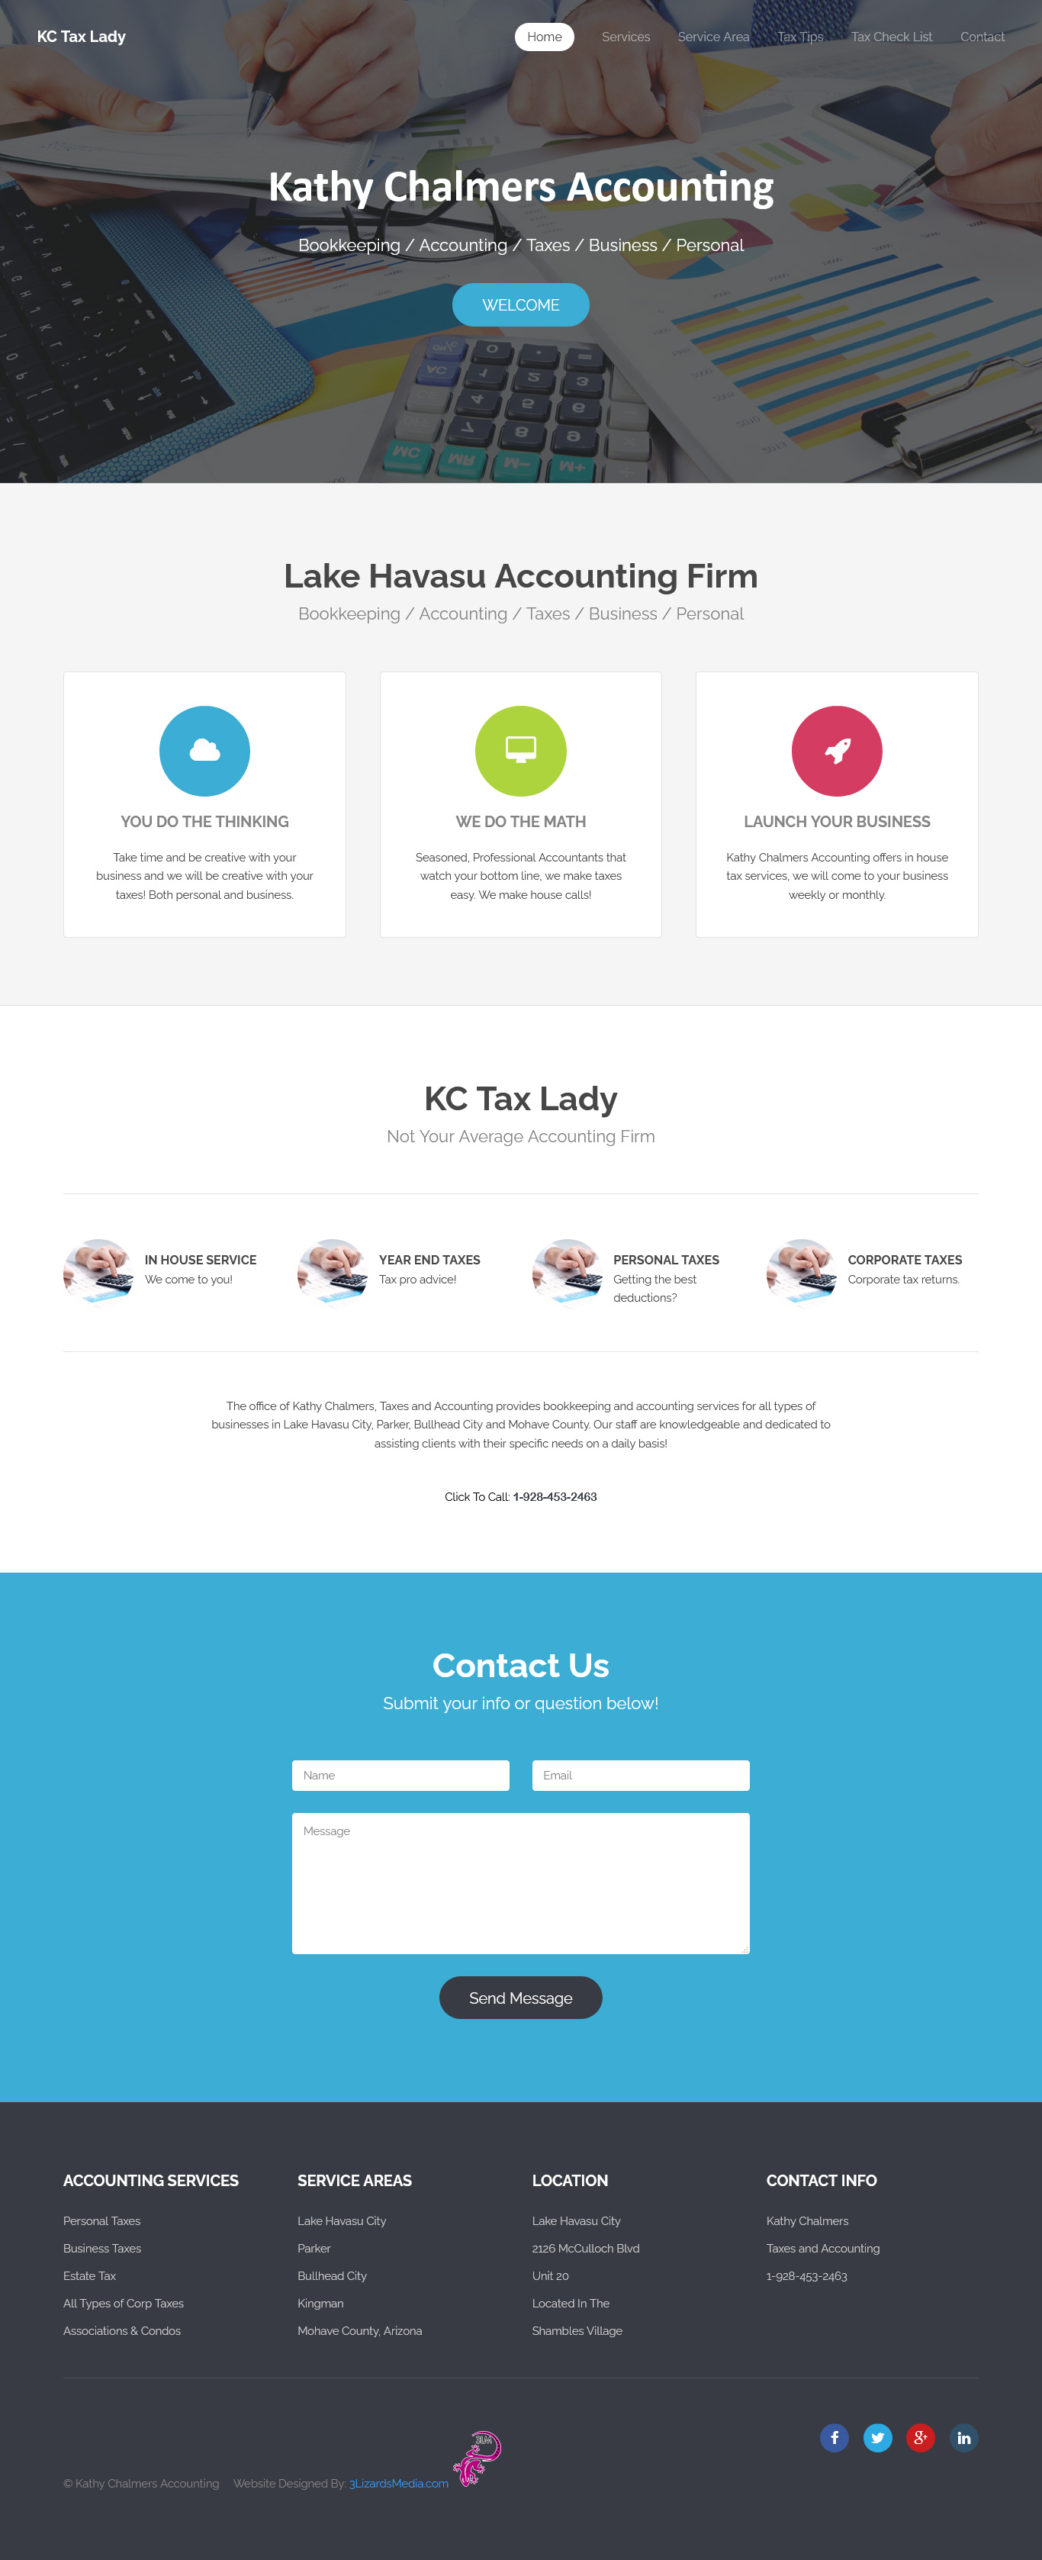 Kathy Chalmers Accounting Website Design